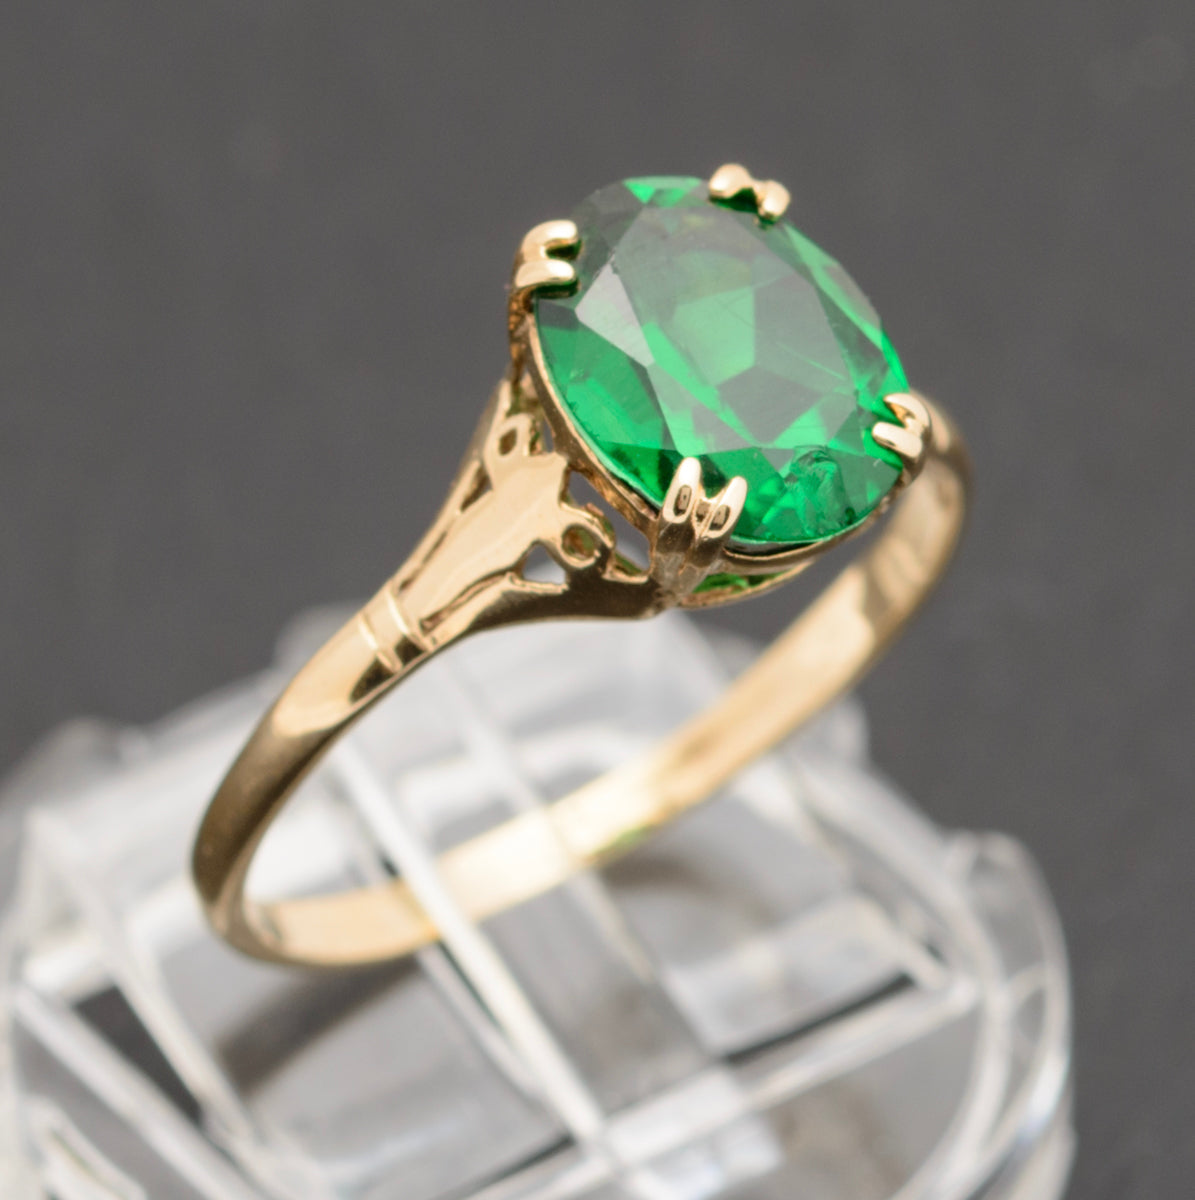 Vintage 9ct Gold Ring With Soude Emerald Gemstone UK Size S  (A1744)